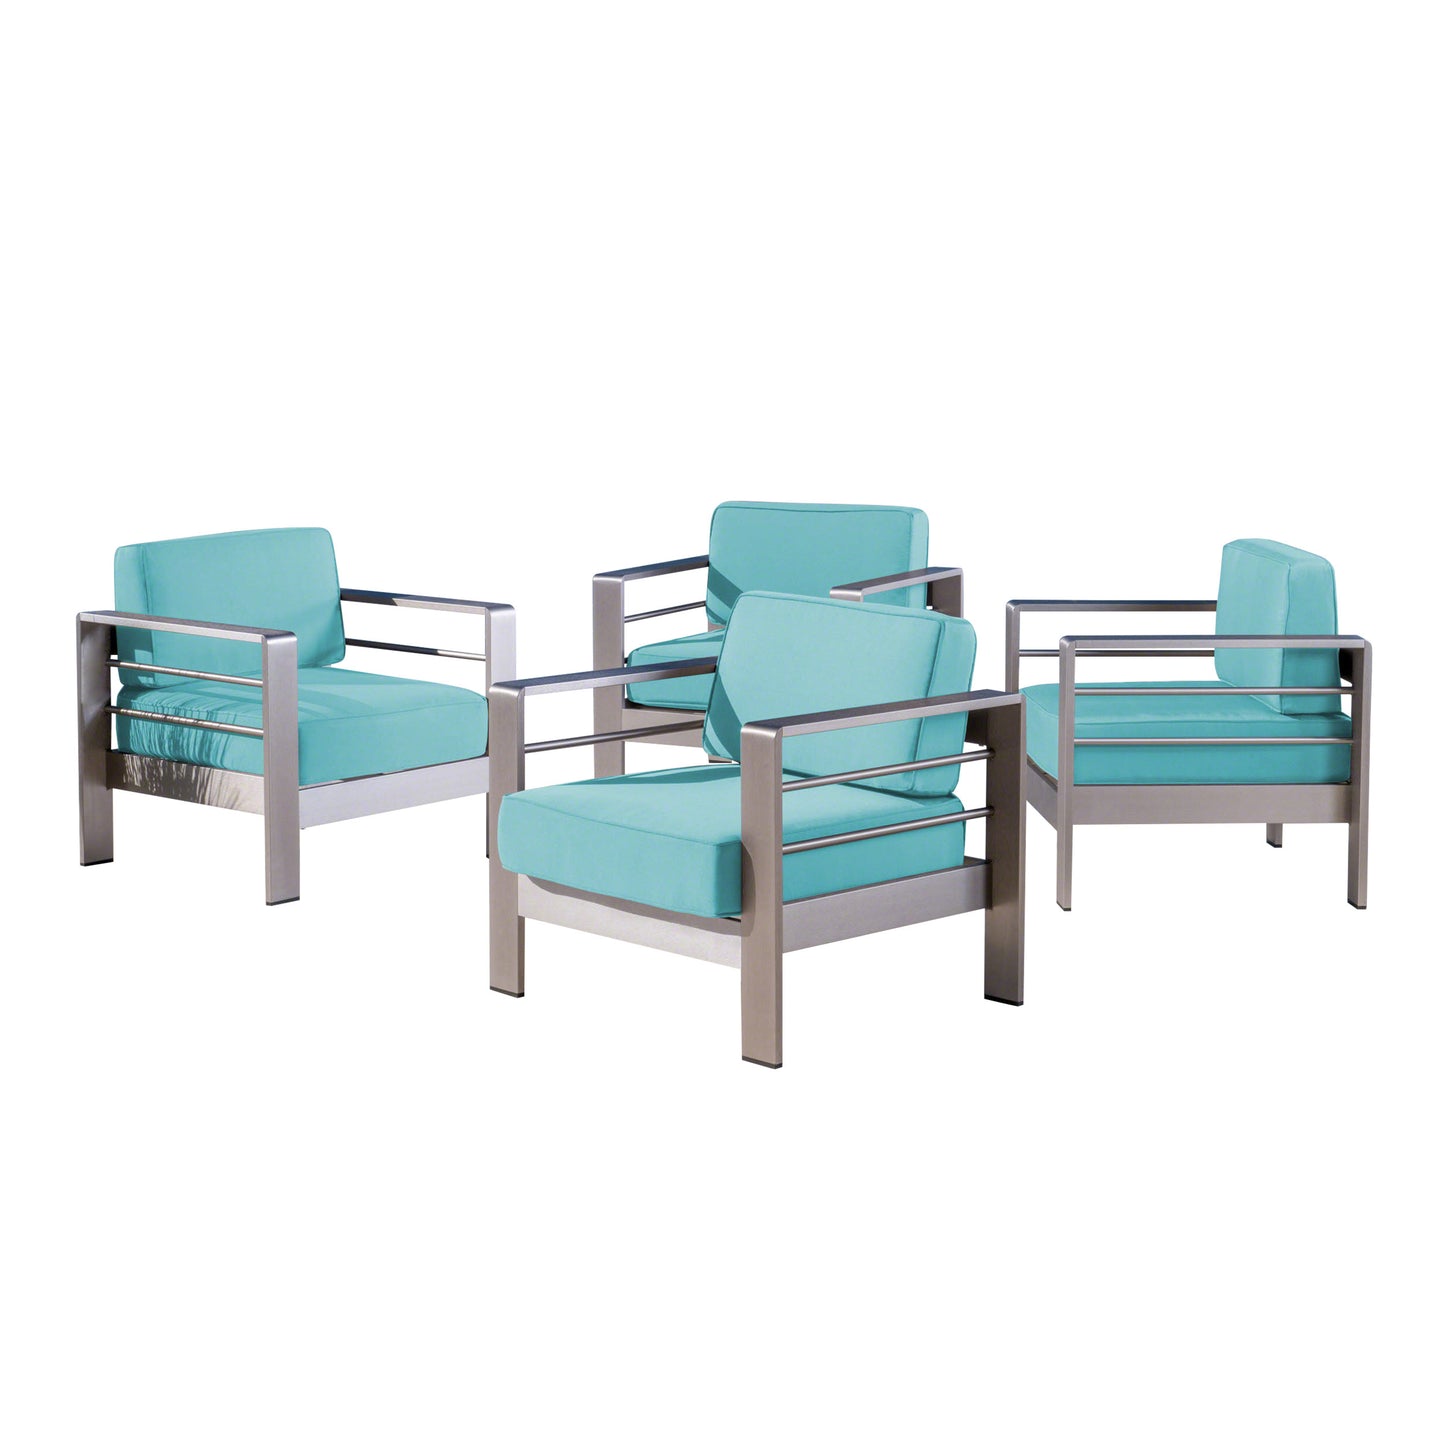 Edward Coral Outdoor Aluminum Club Chairs with Cushions (Set of 4)